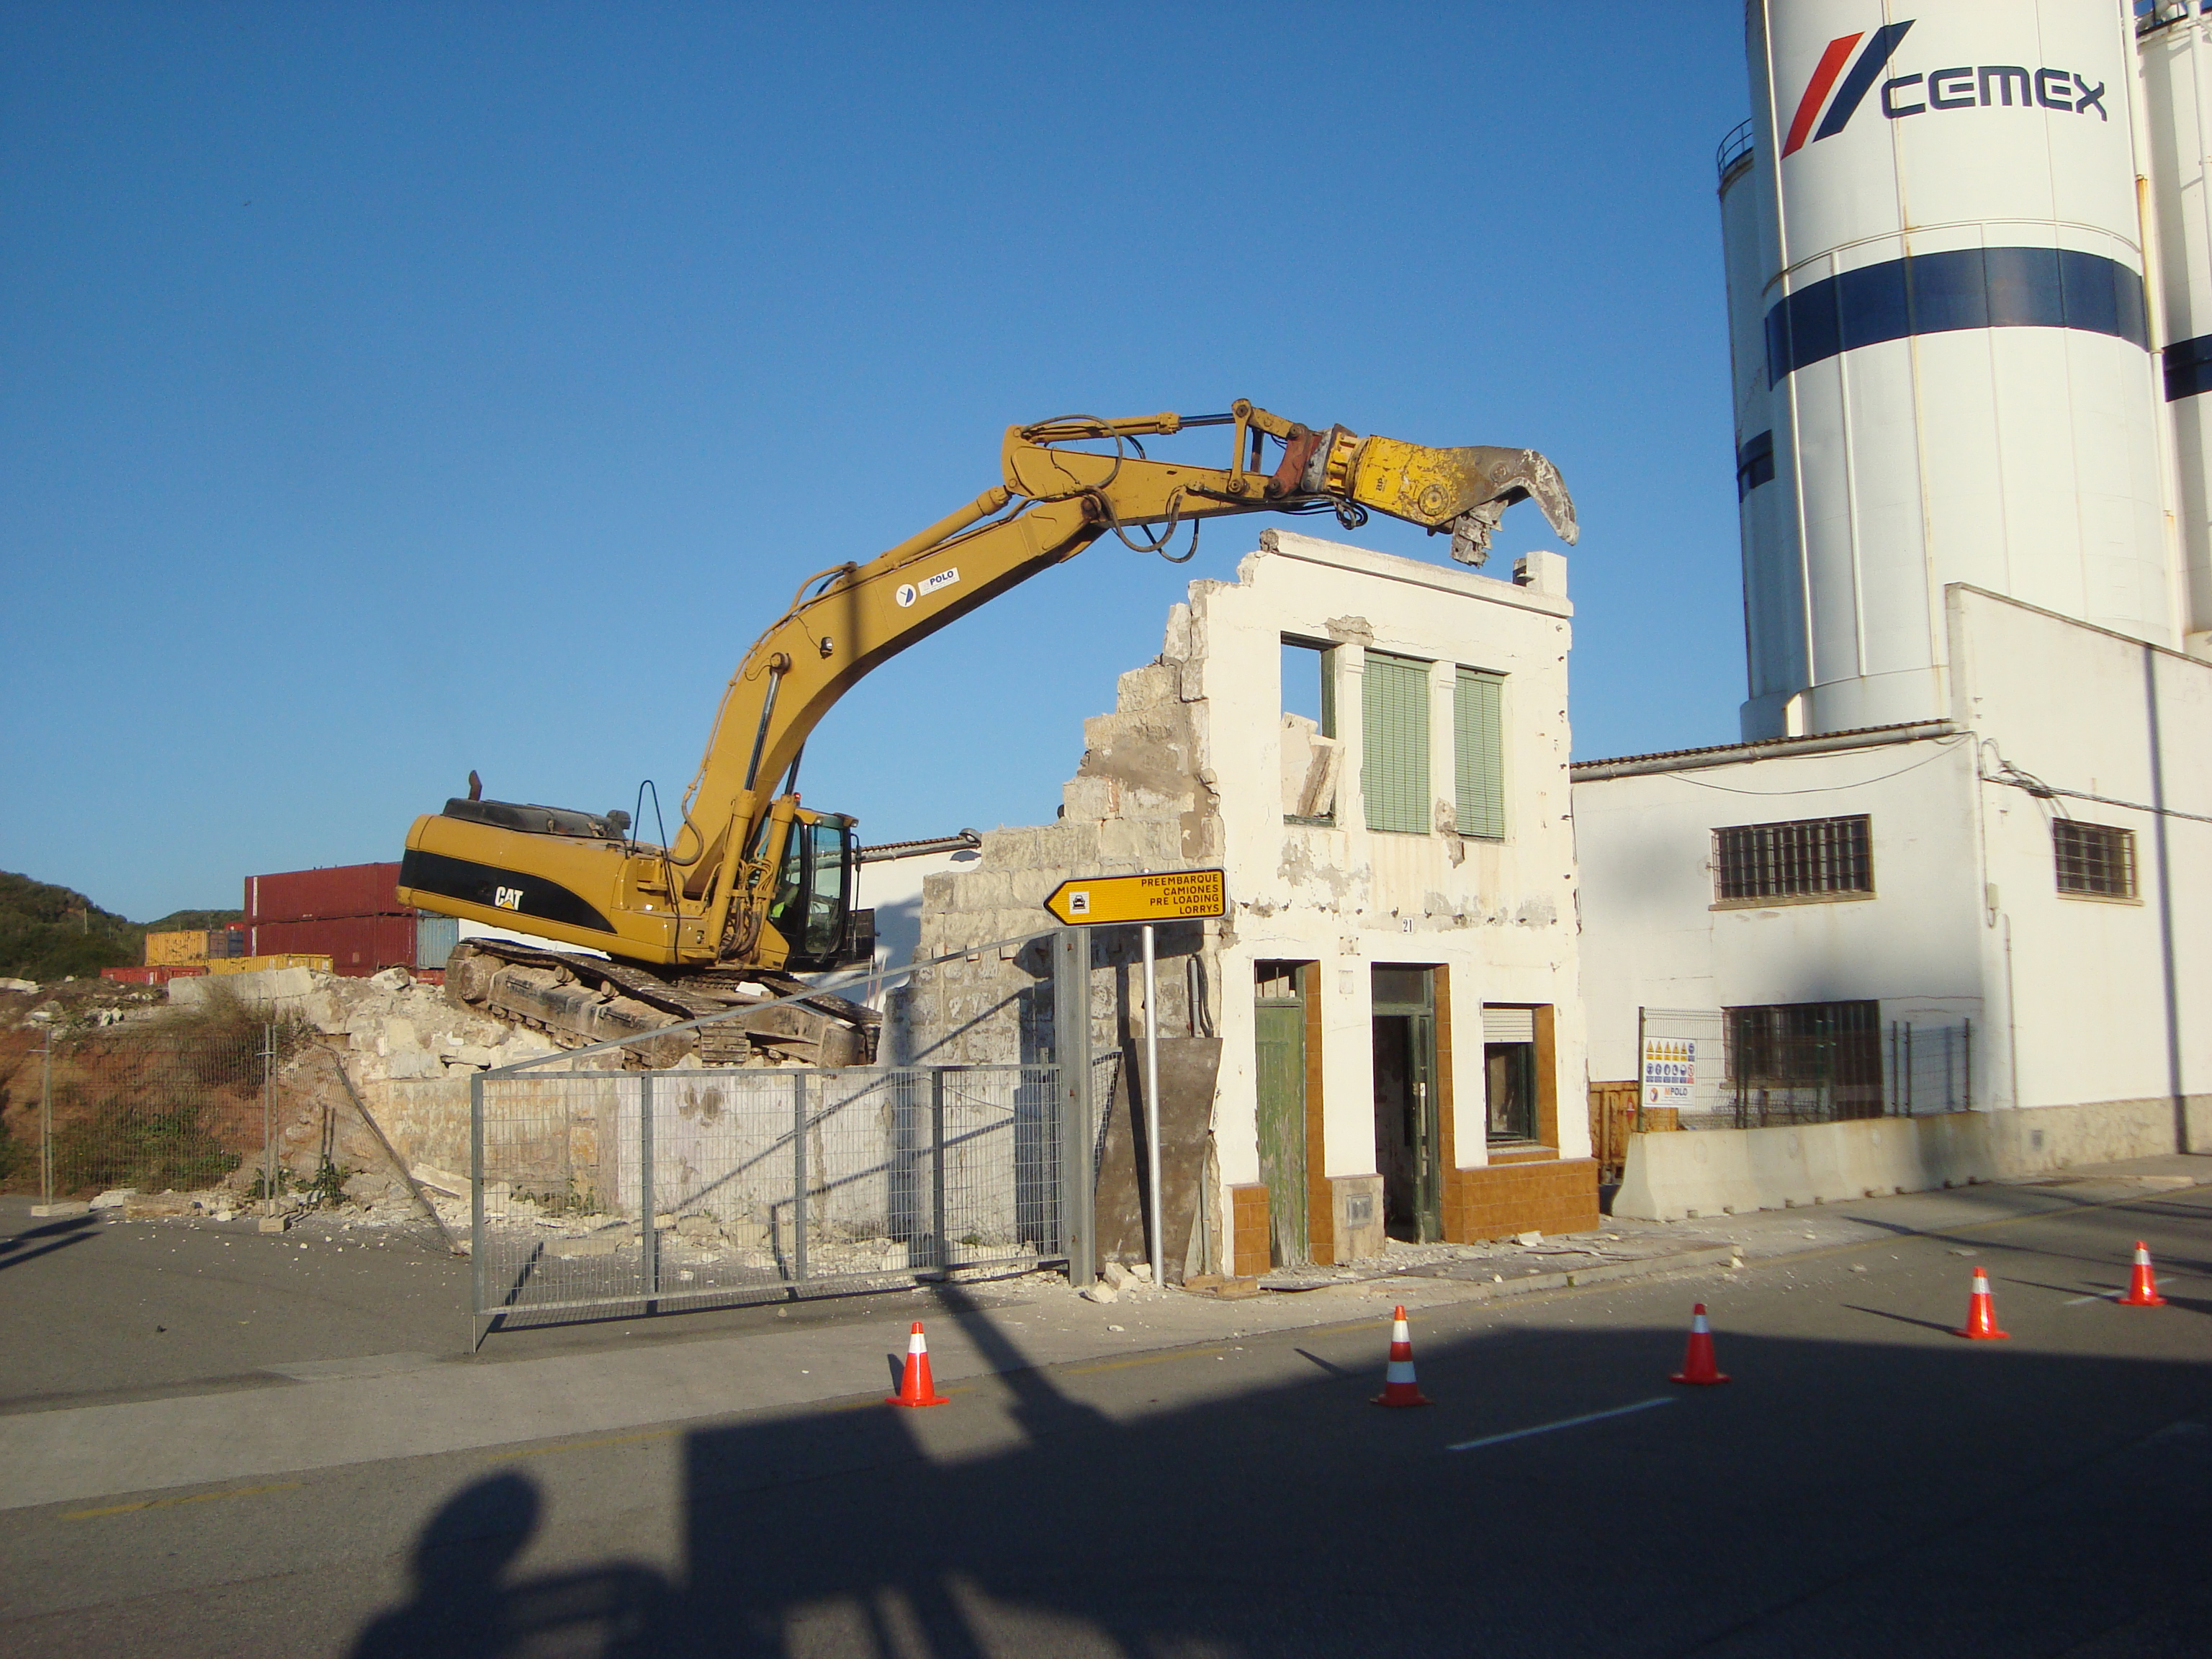 Demolition works of different buildings acqui-red by the APB have begun in Maó’s port